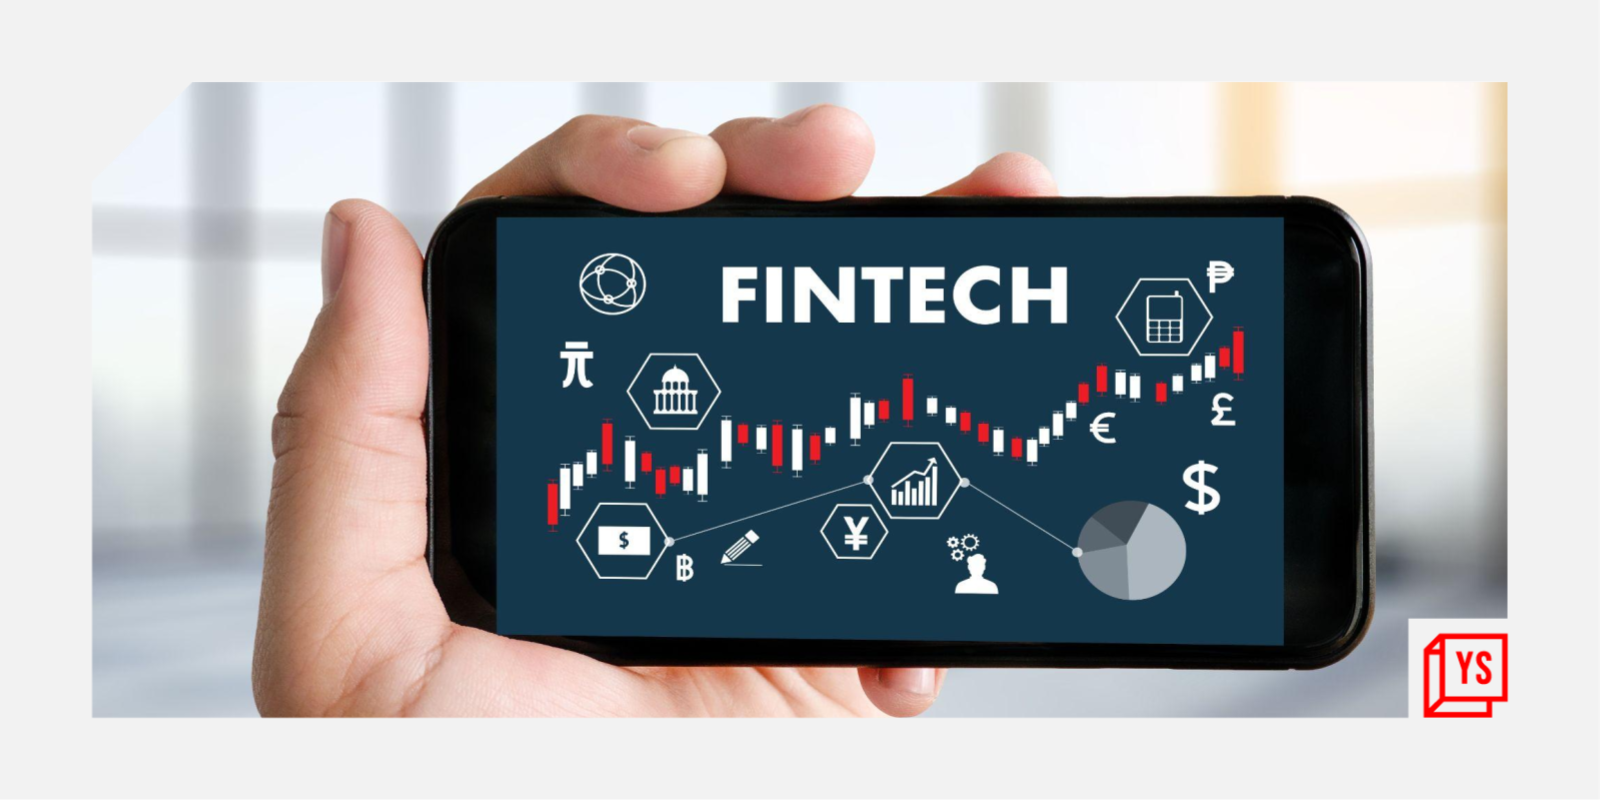 Fintech: Learnings from the world for India

